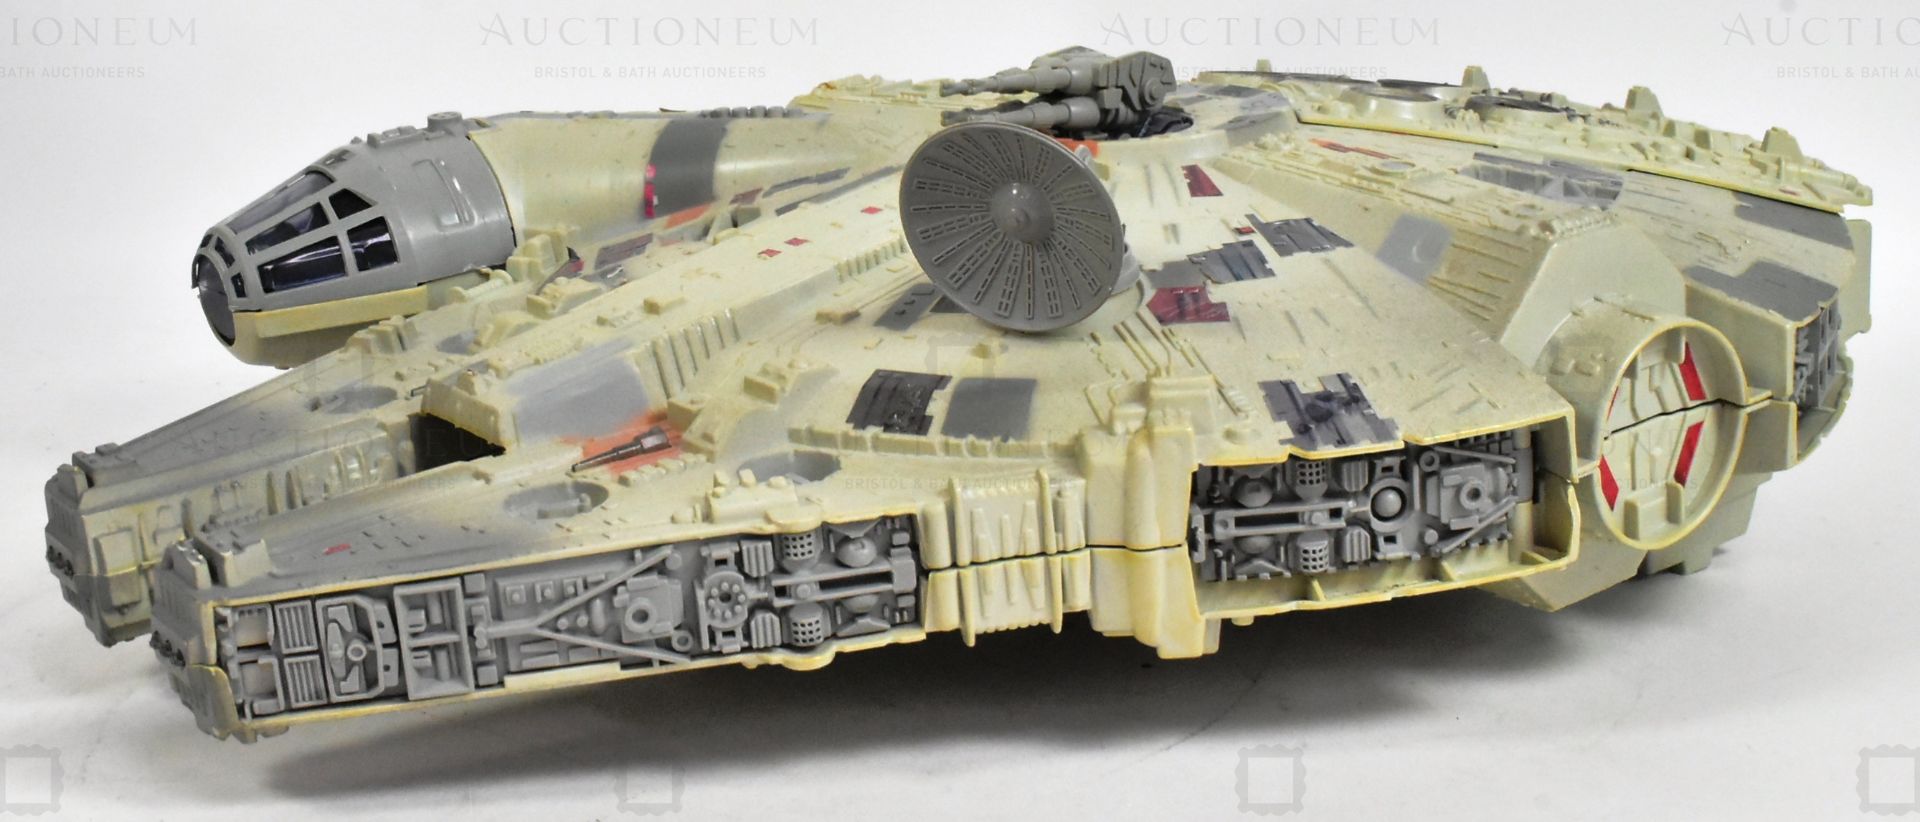 STAR WARS - 1995 KENNER ELECTRONIC MILLENNIUM FALCON - Image 2 of 6